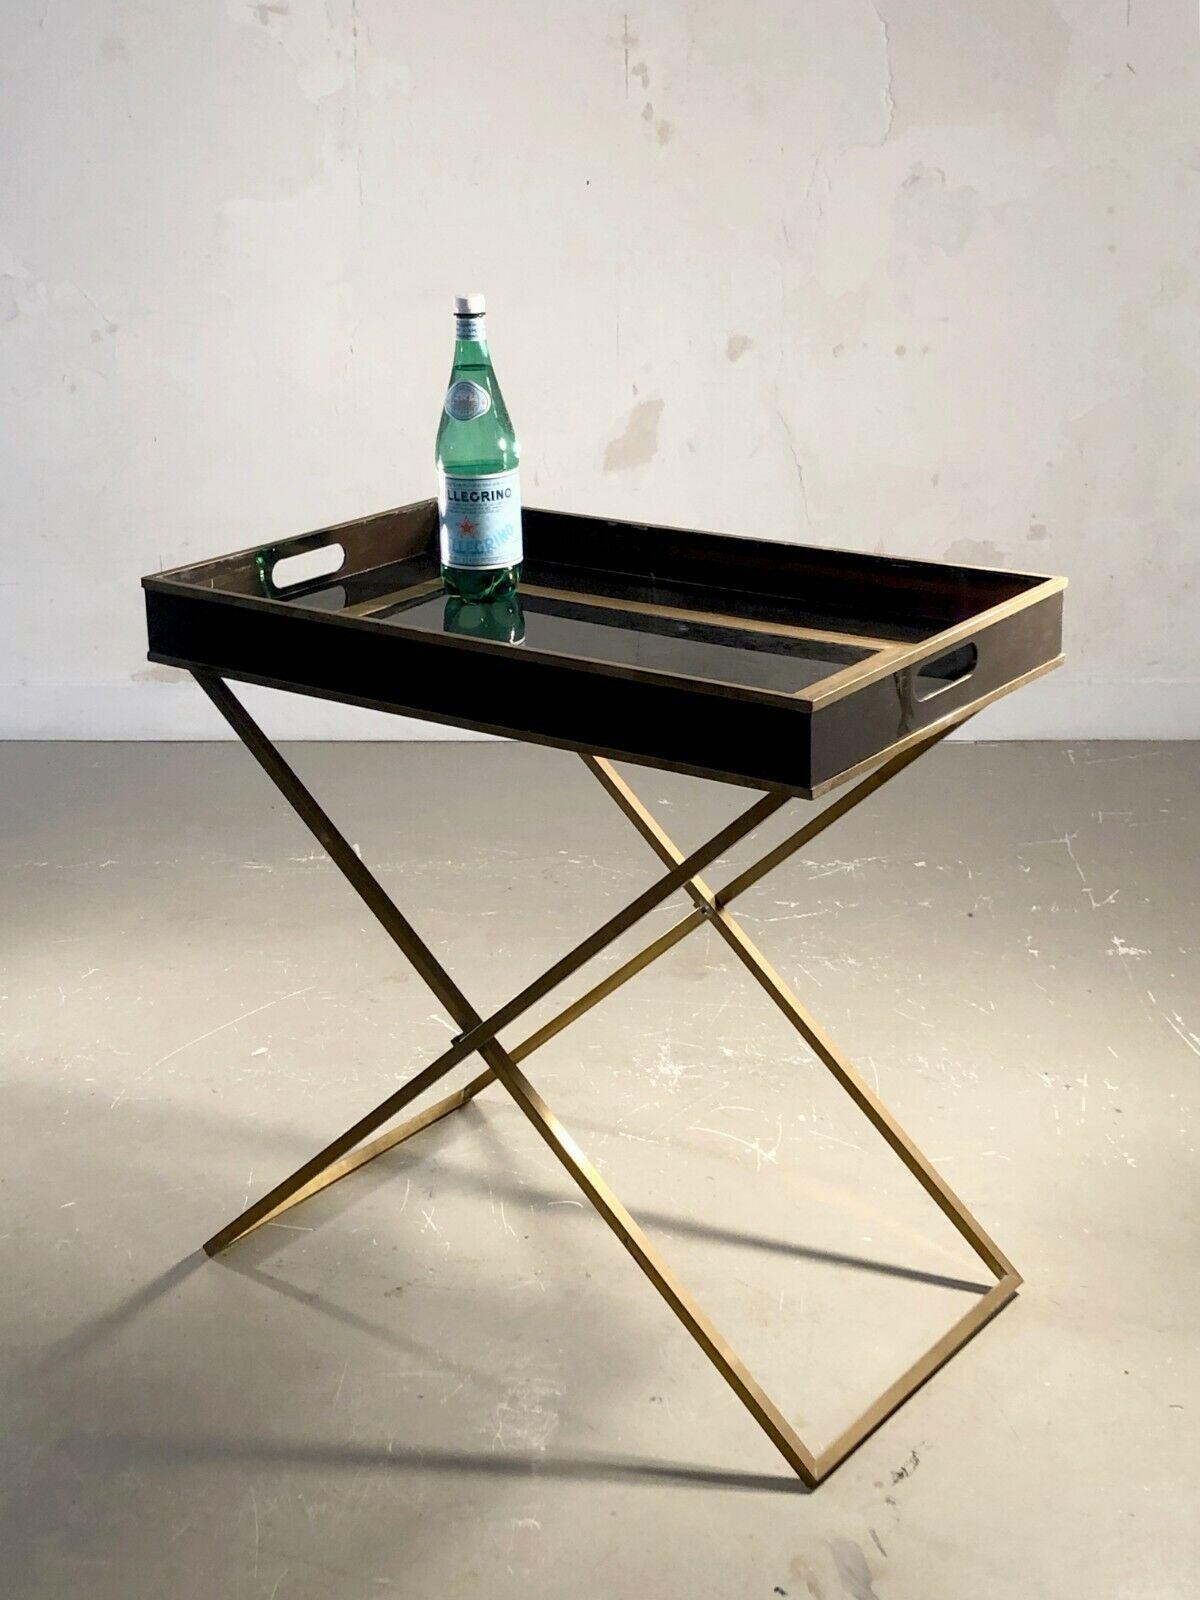 A SHABBY-CHIC Lucite & Brass SIDE TABLE & PLATE, by JANSEN, France 1970 For Sale 4